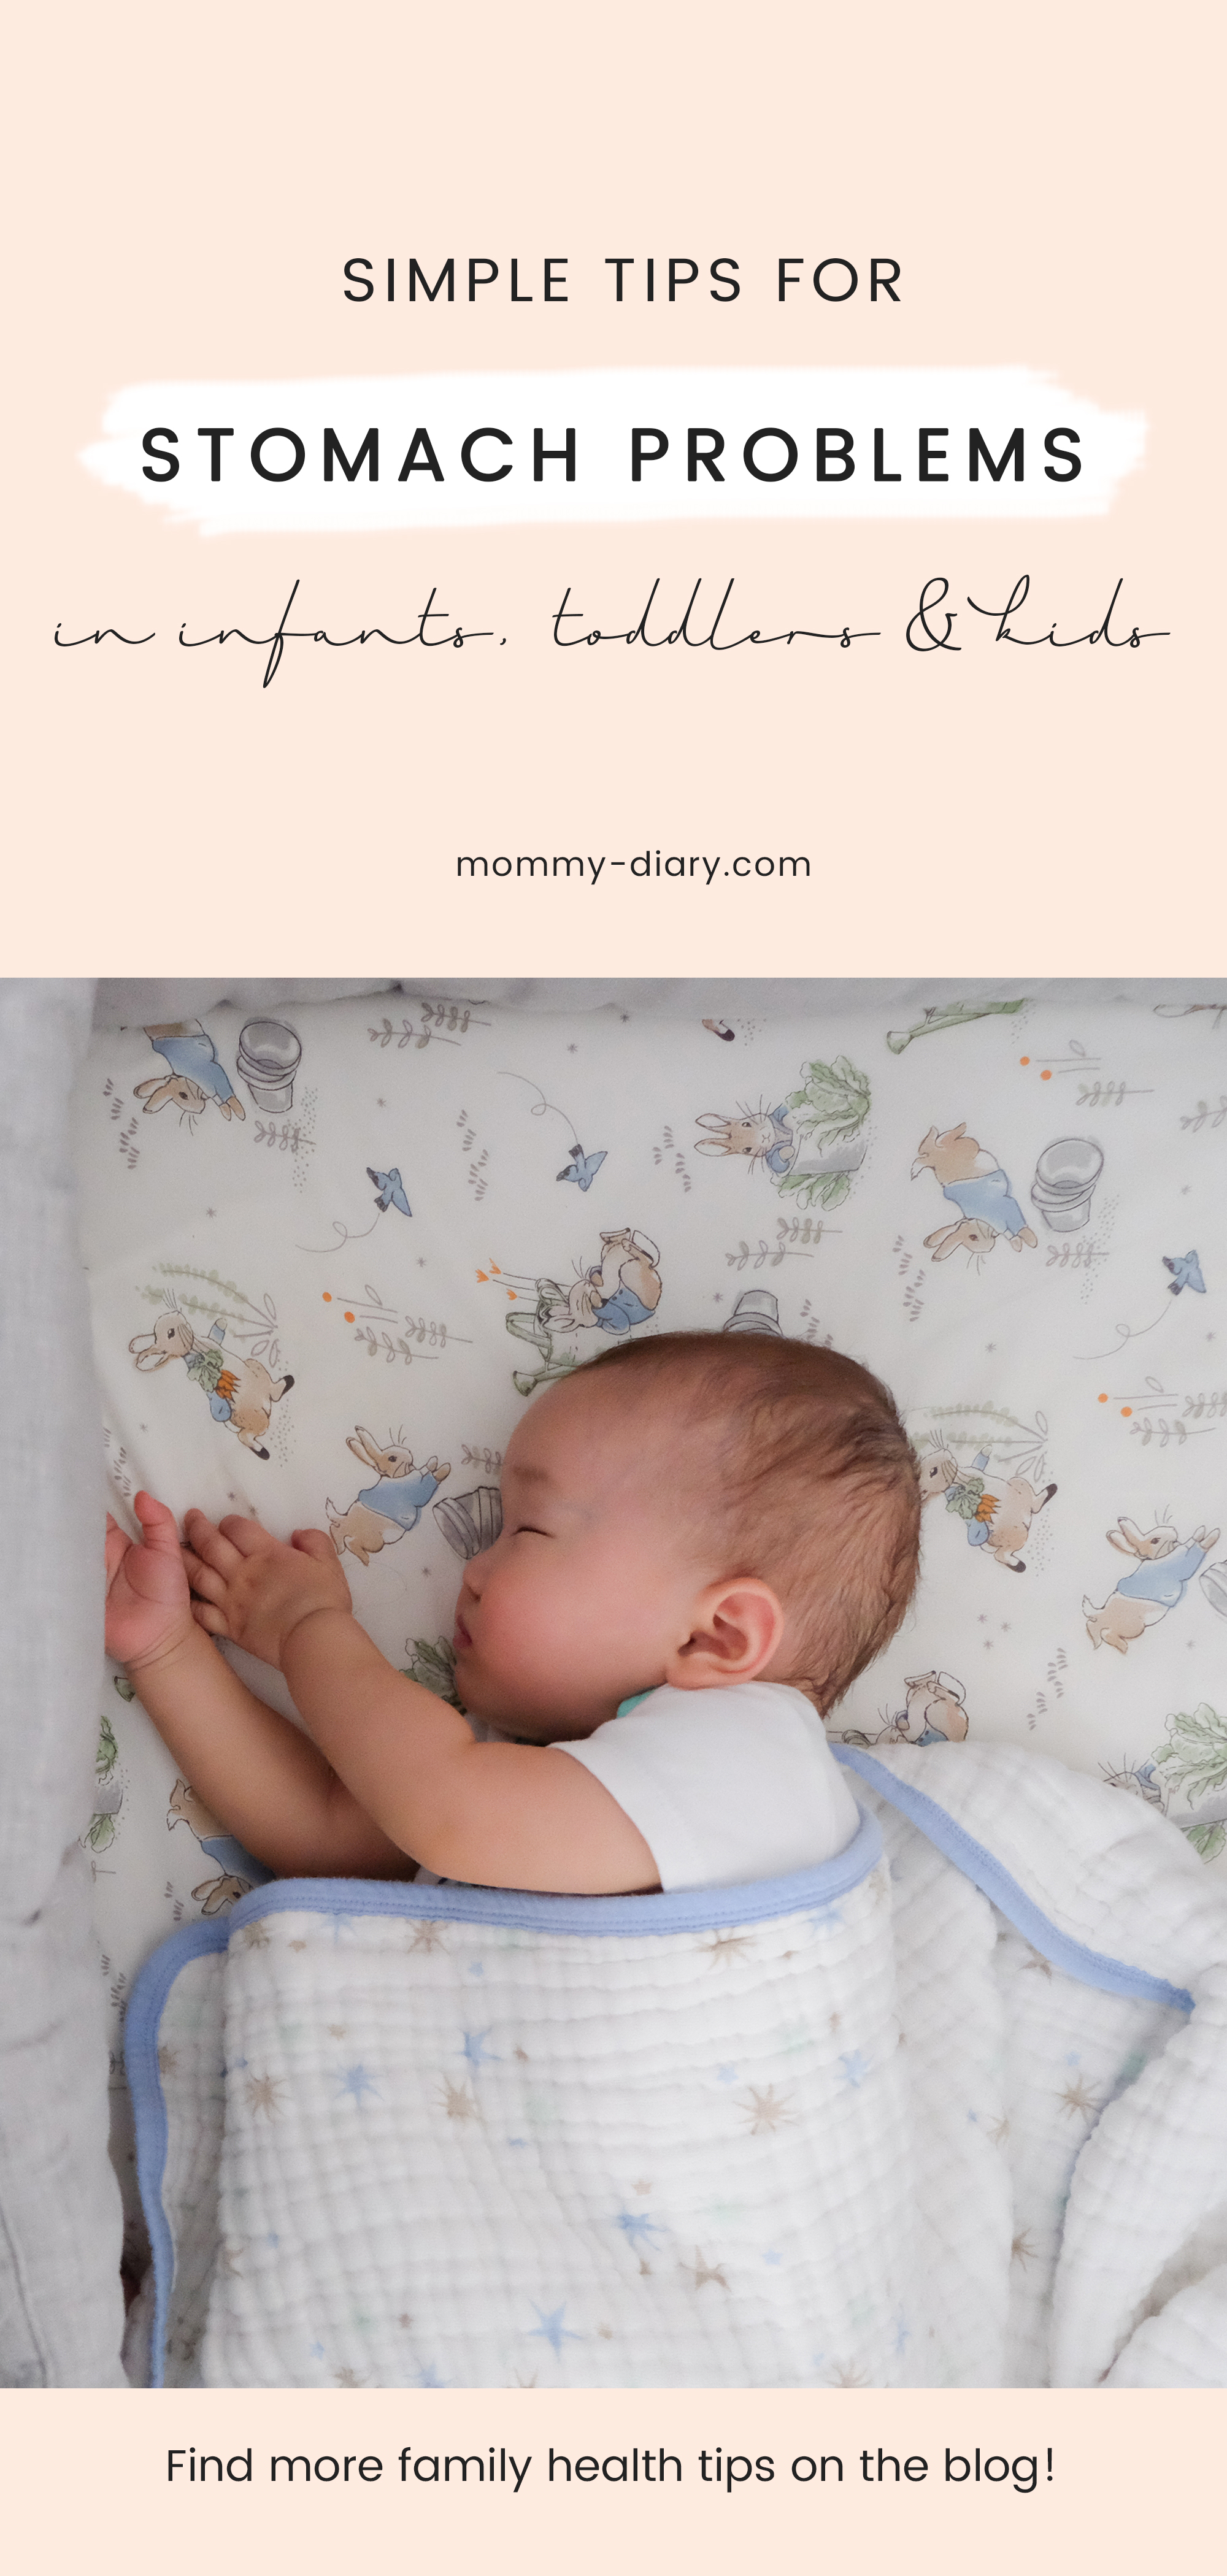 Simple Tips For Stomach Problems in infants, toddler, & kids